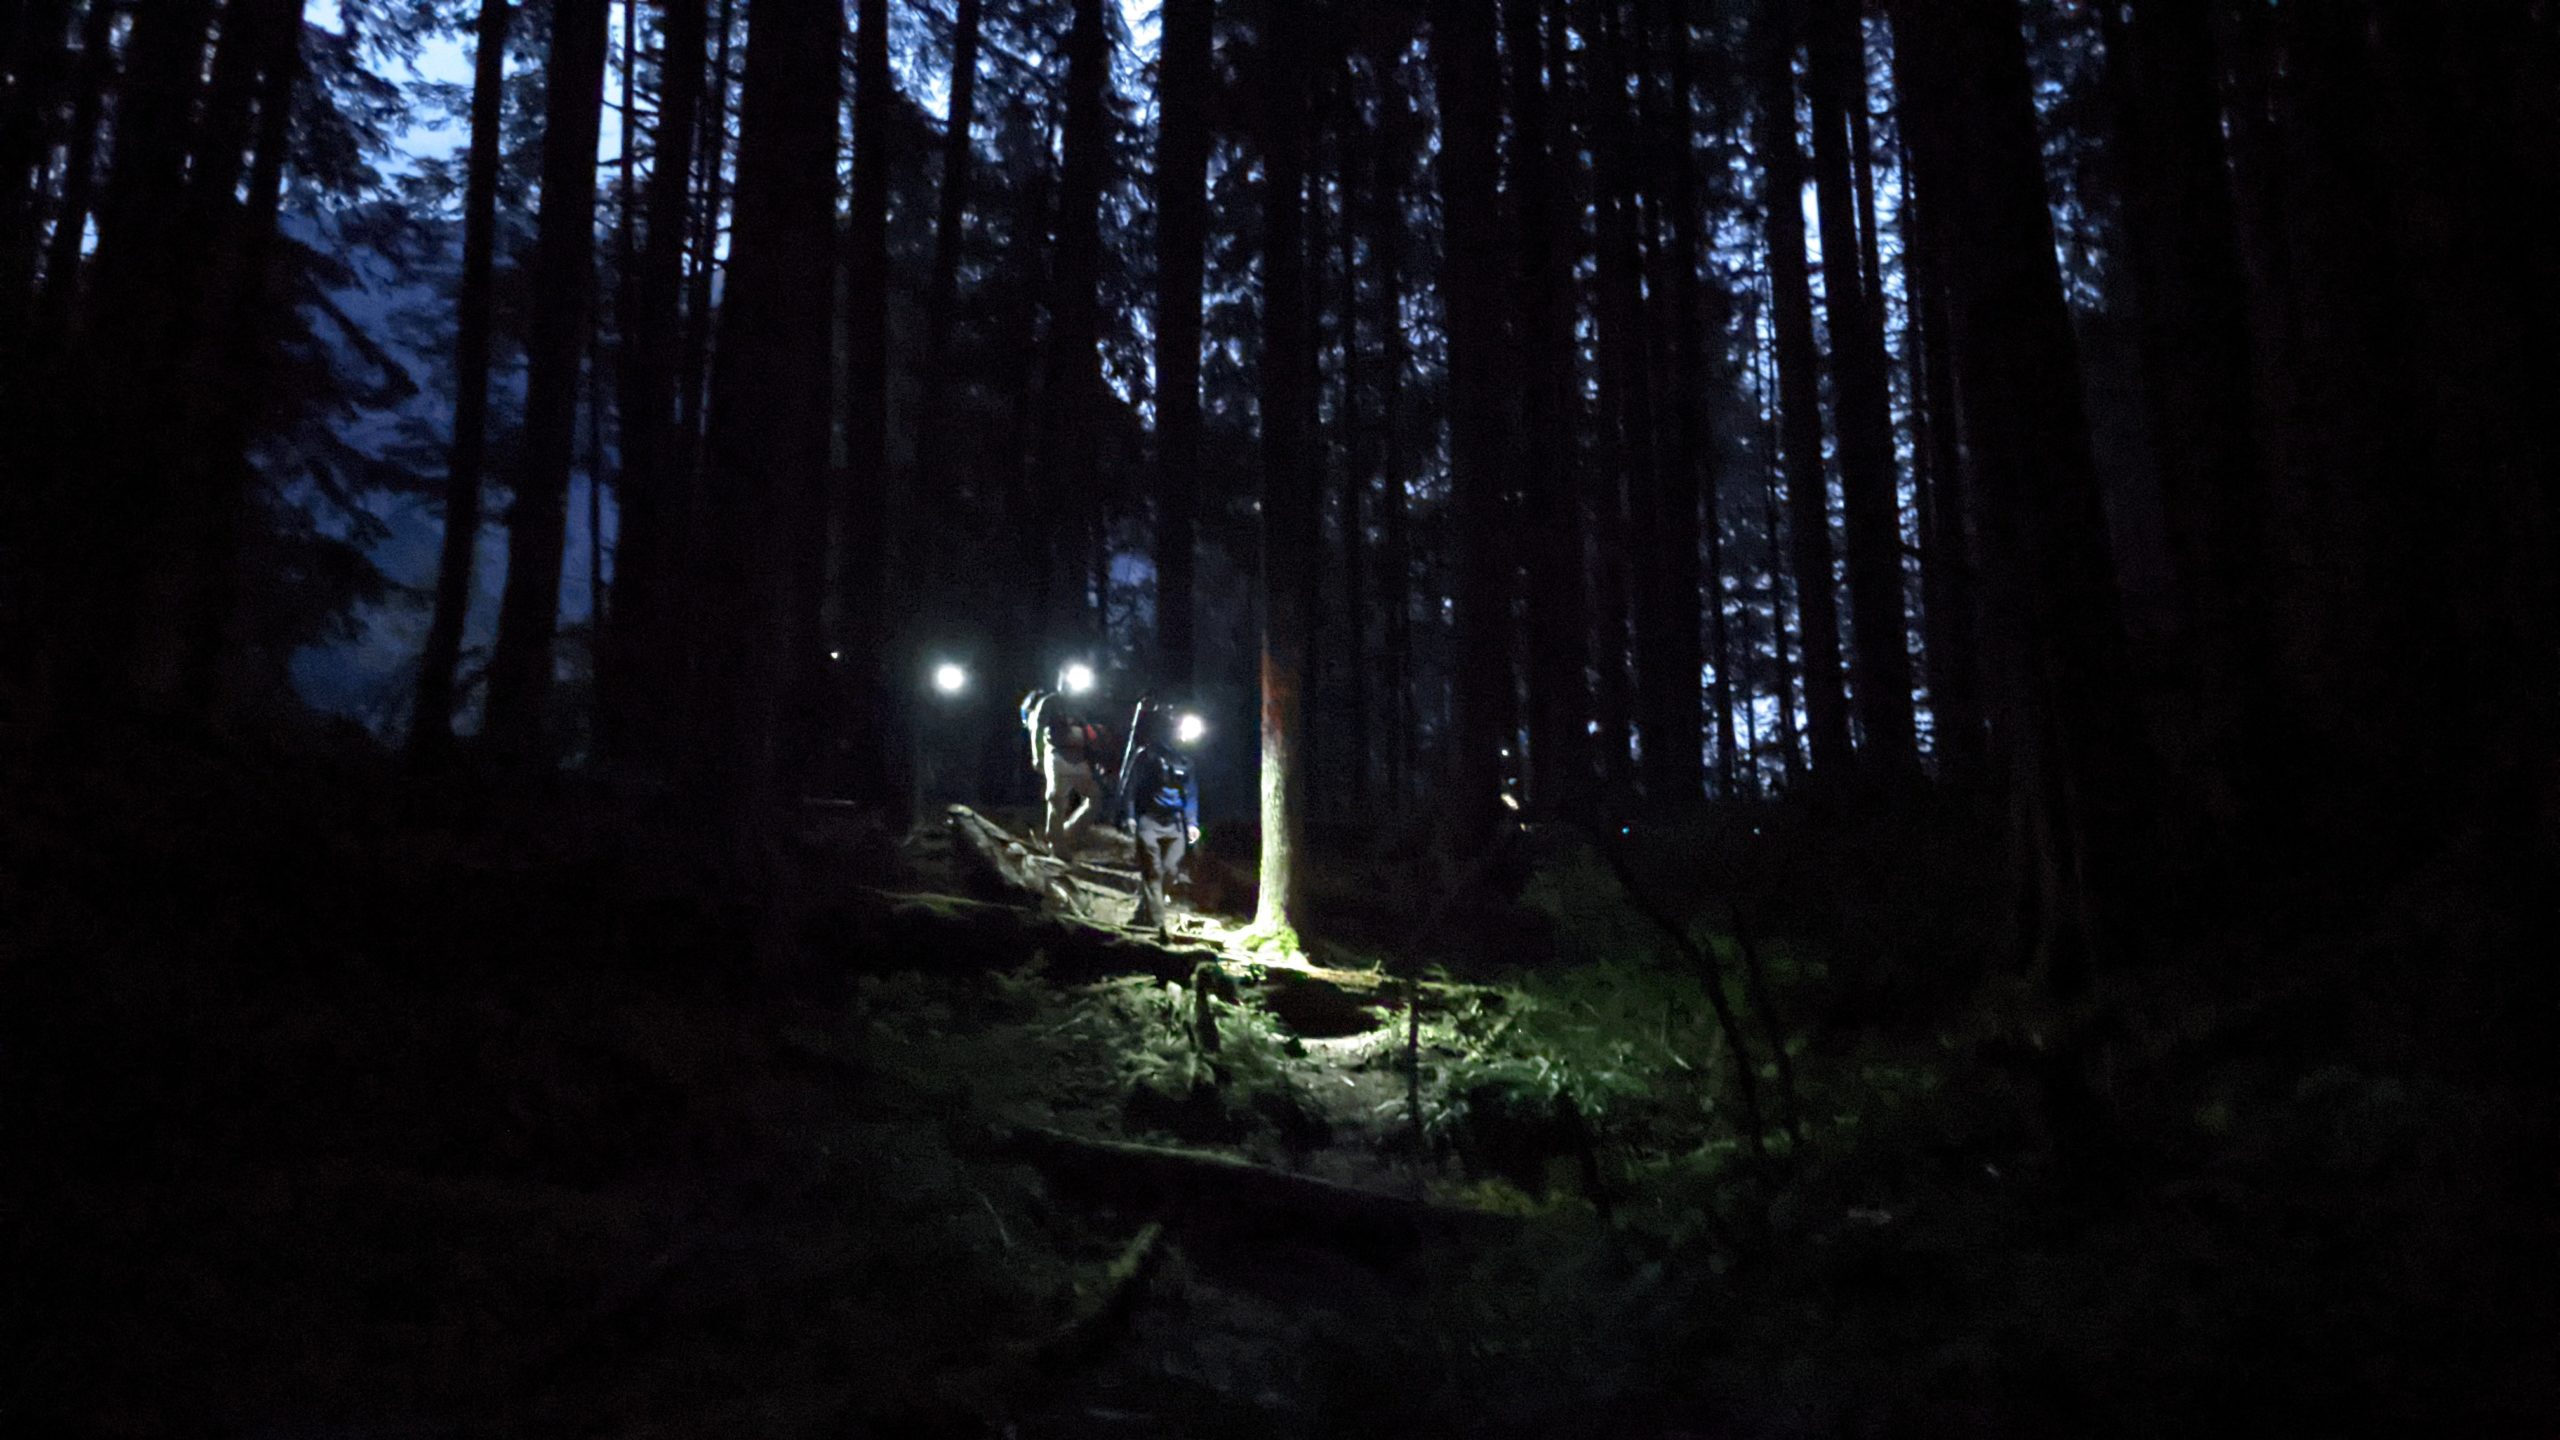 Rescuers hike through the forest at night using headlamps to shine the way.